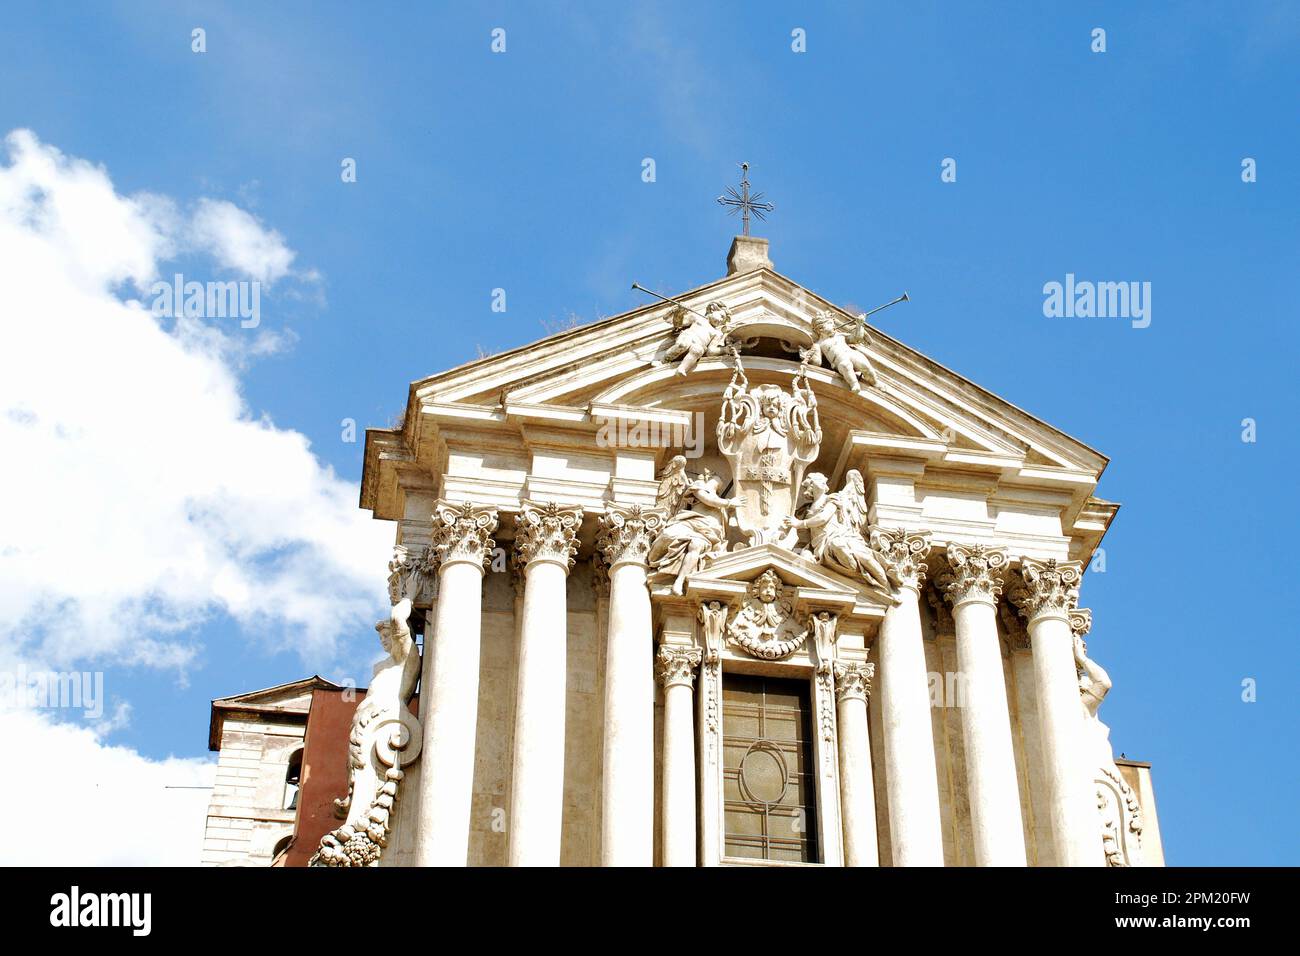 Saints Vincent and Anastasius at Trevi, it is a Baroque church built from 1646 to 1650, located in Rome, Italy, Europe Stock Photo